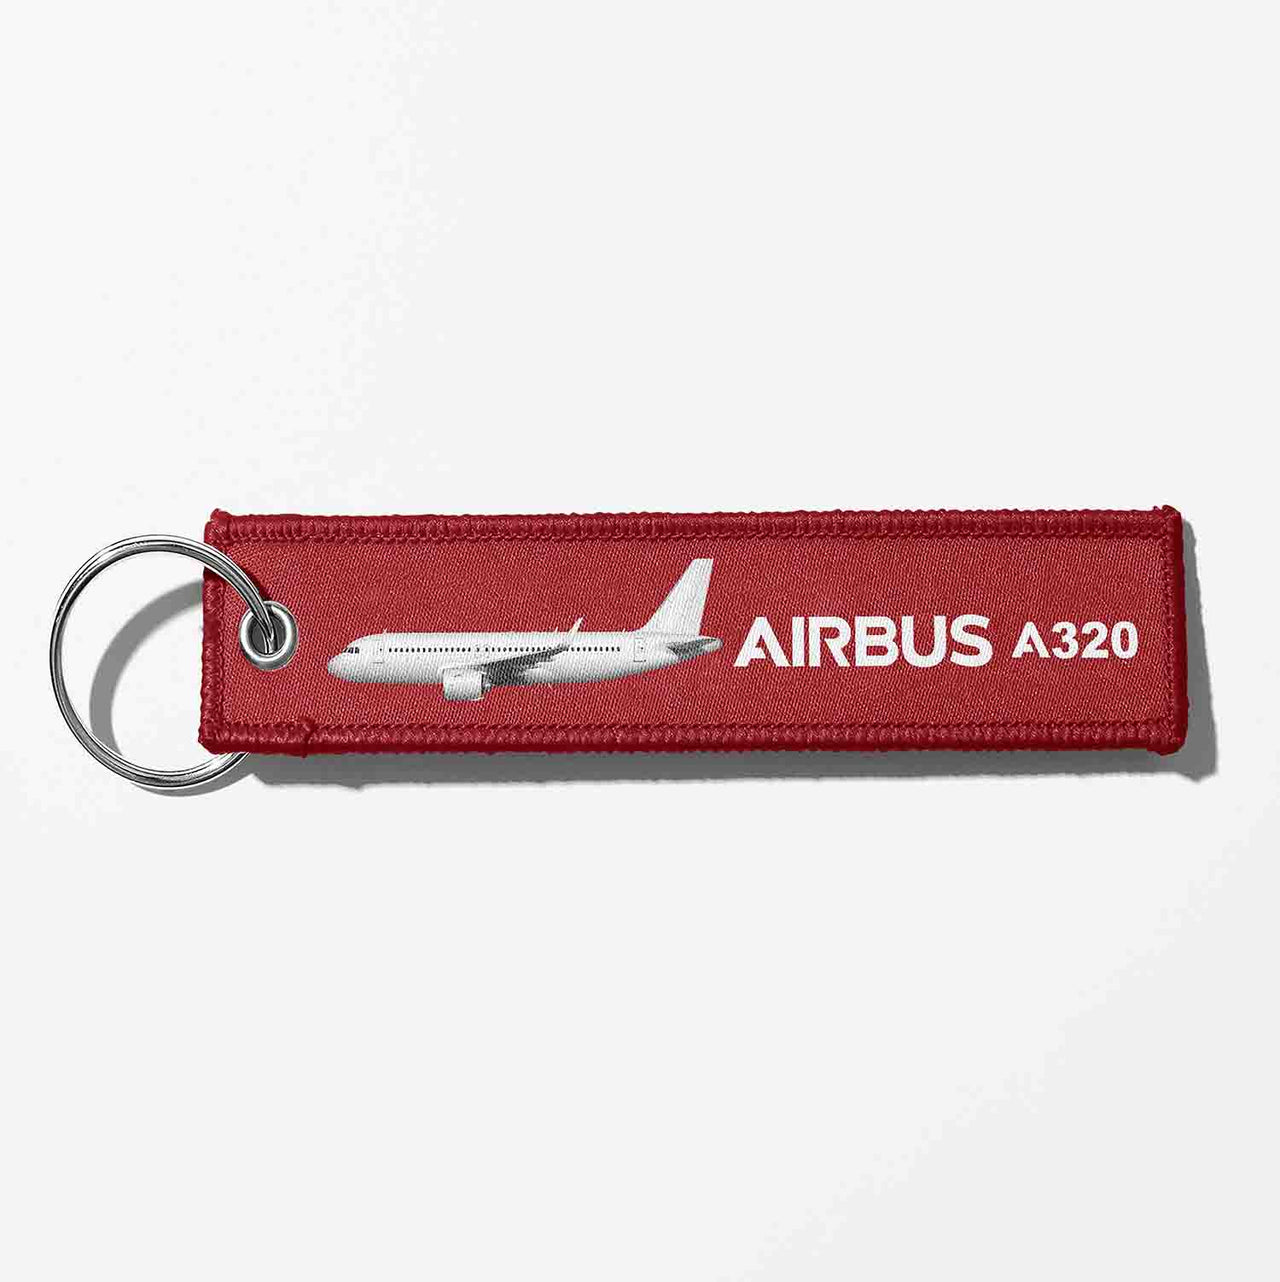 The Airbus A320 Designed Key Chains